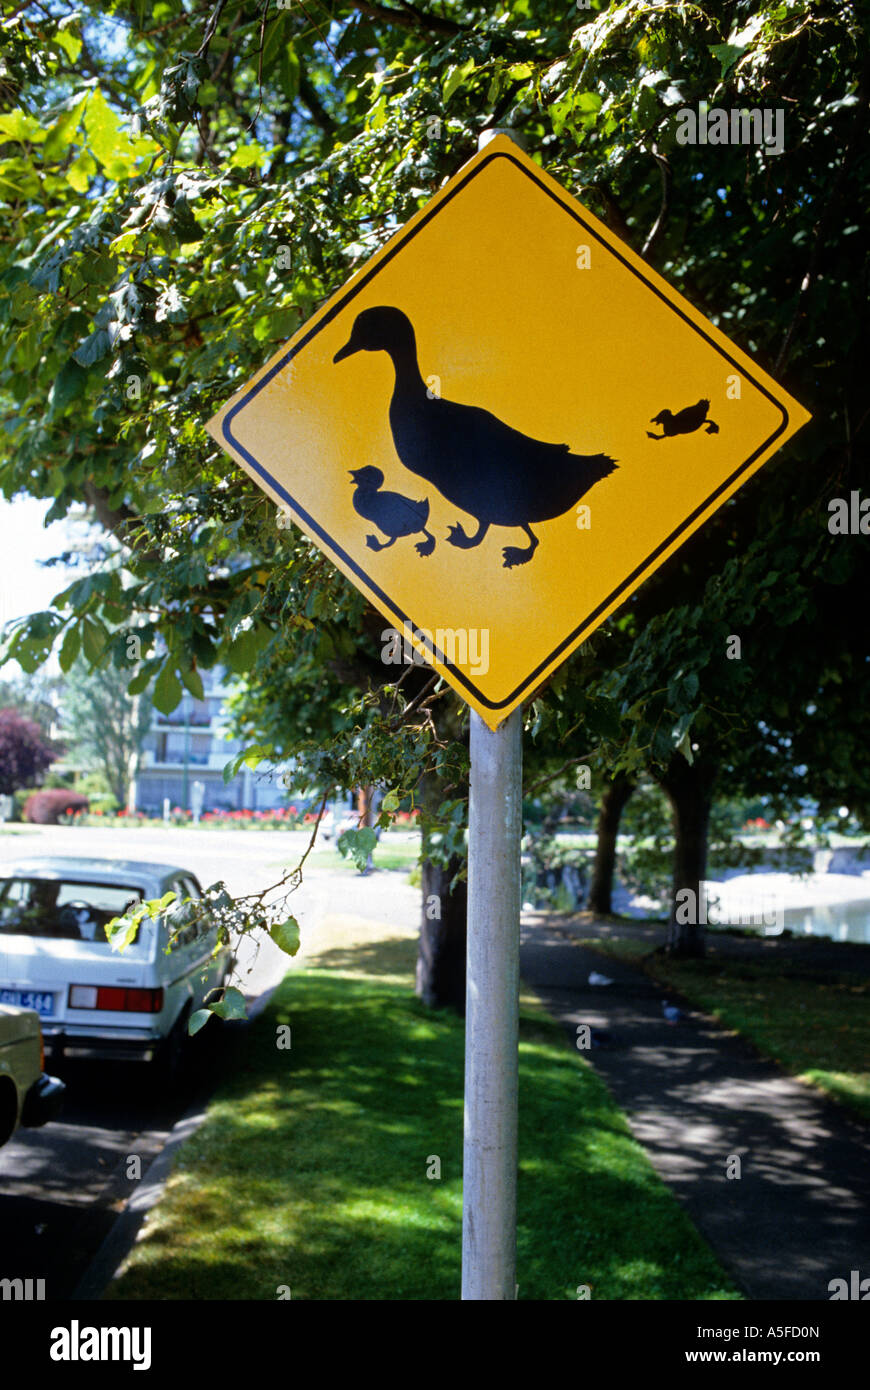 A traffic sign warning of duck crossing Stock Photo